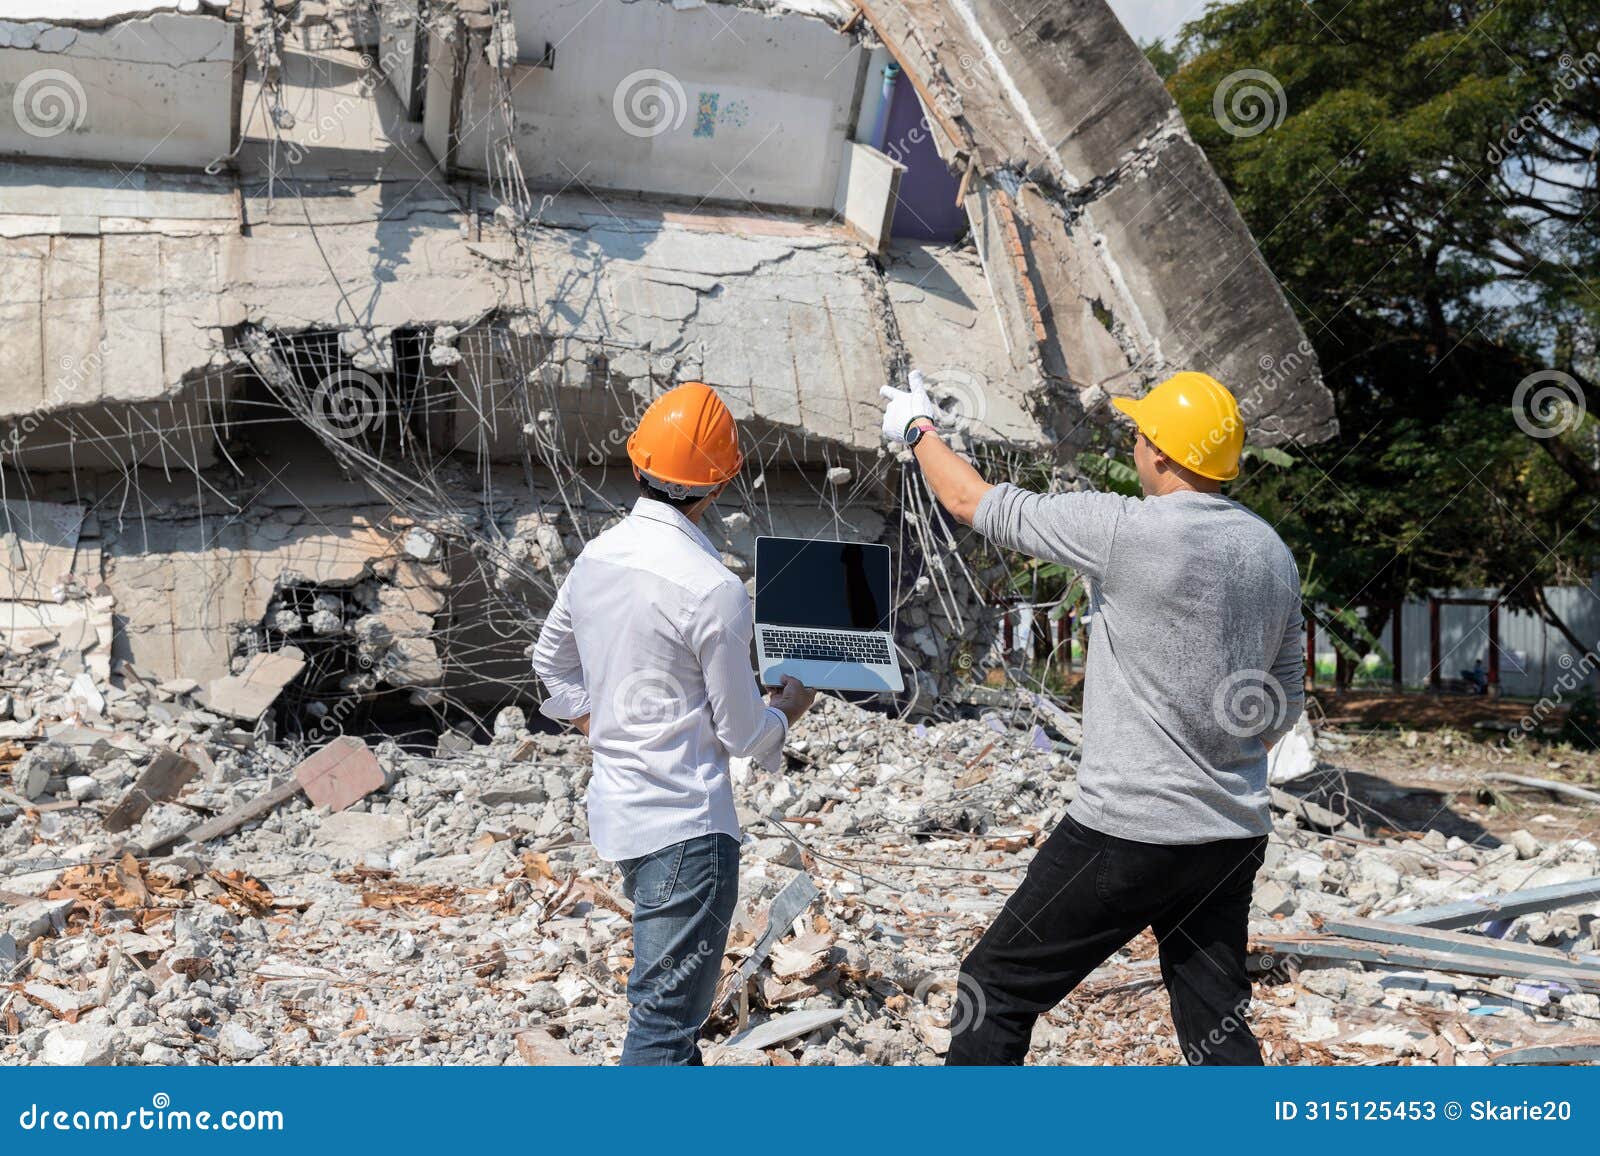 demolition control supervisor and contractor discussing on demolish building